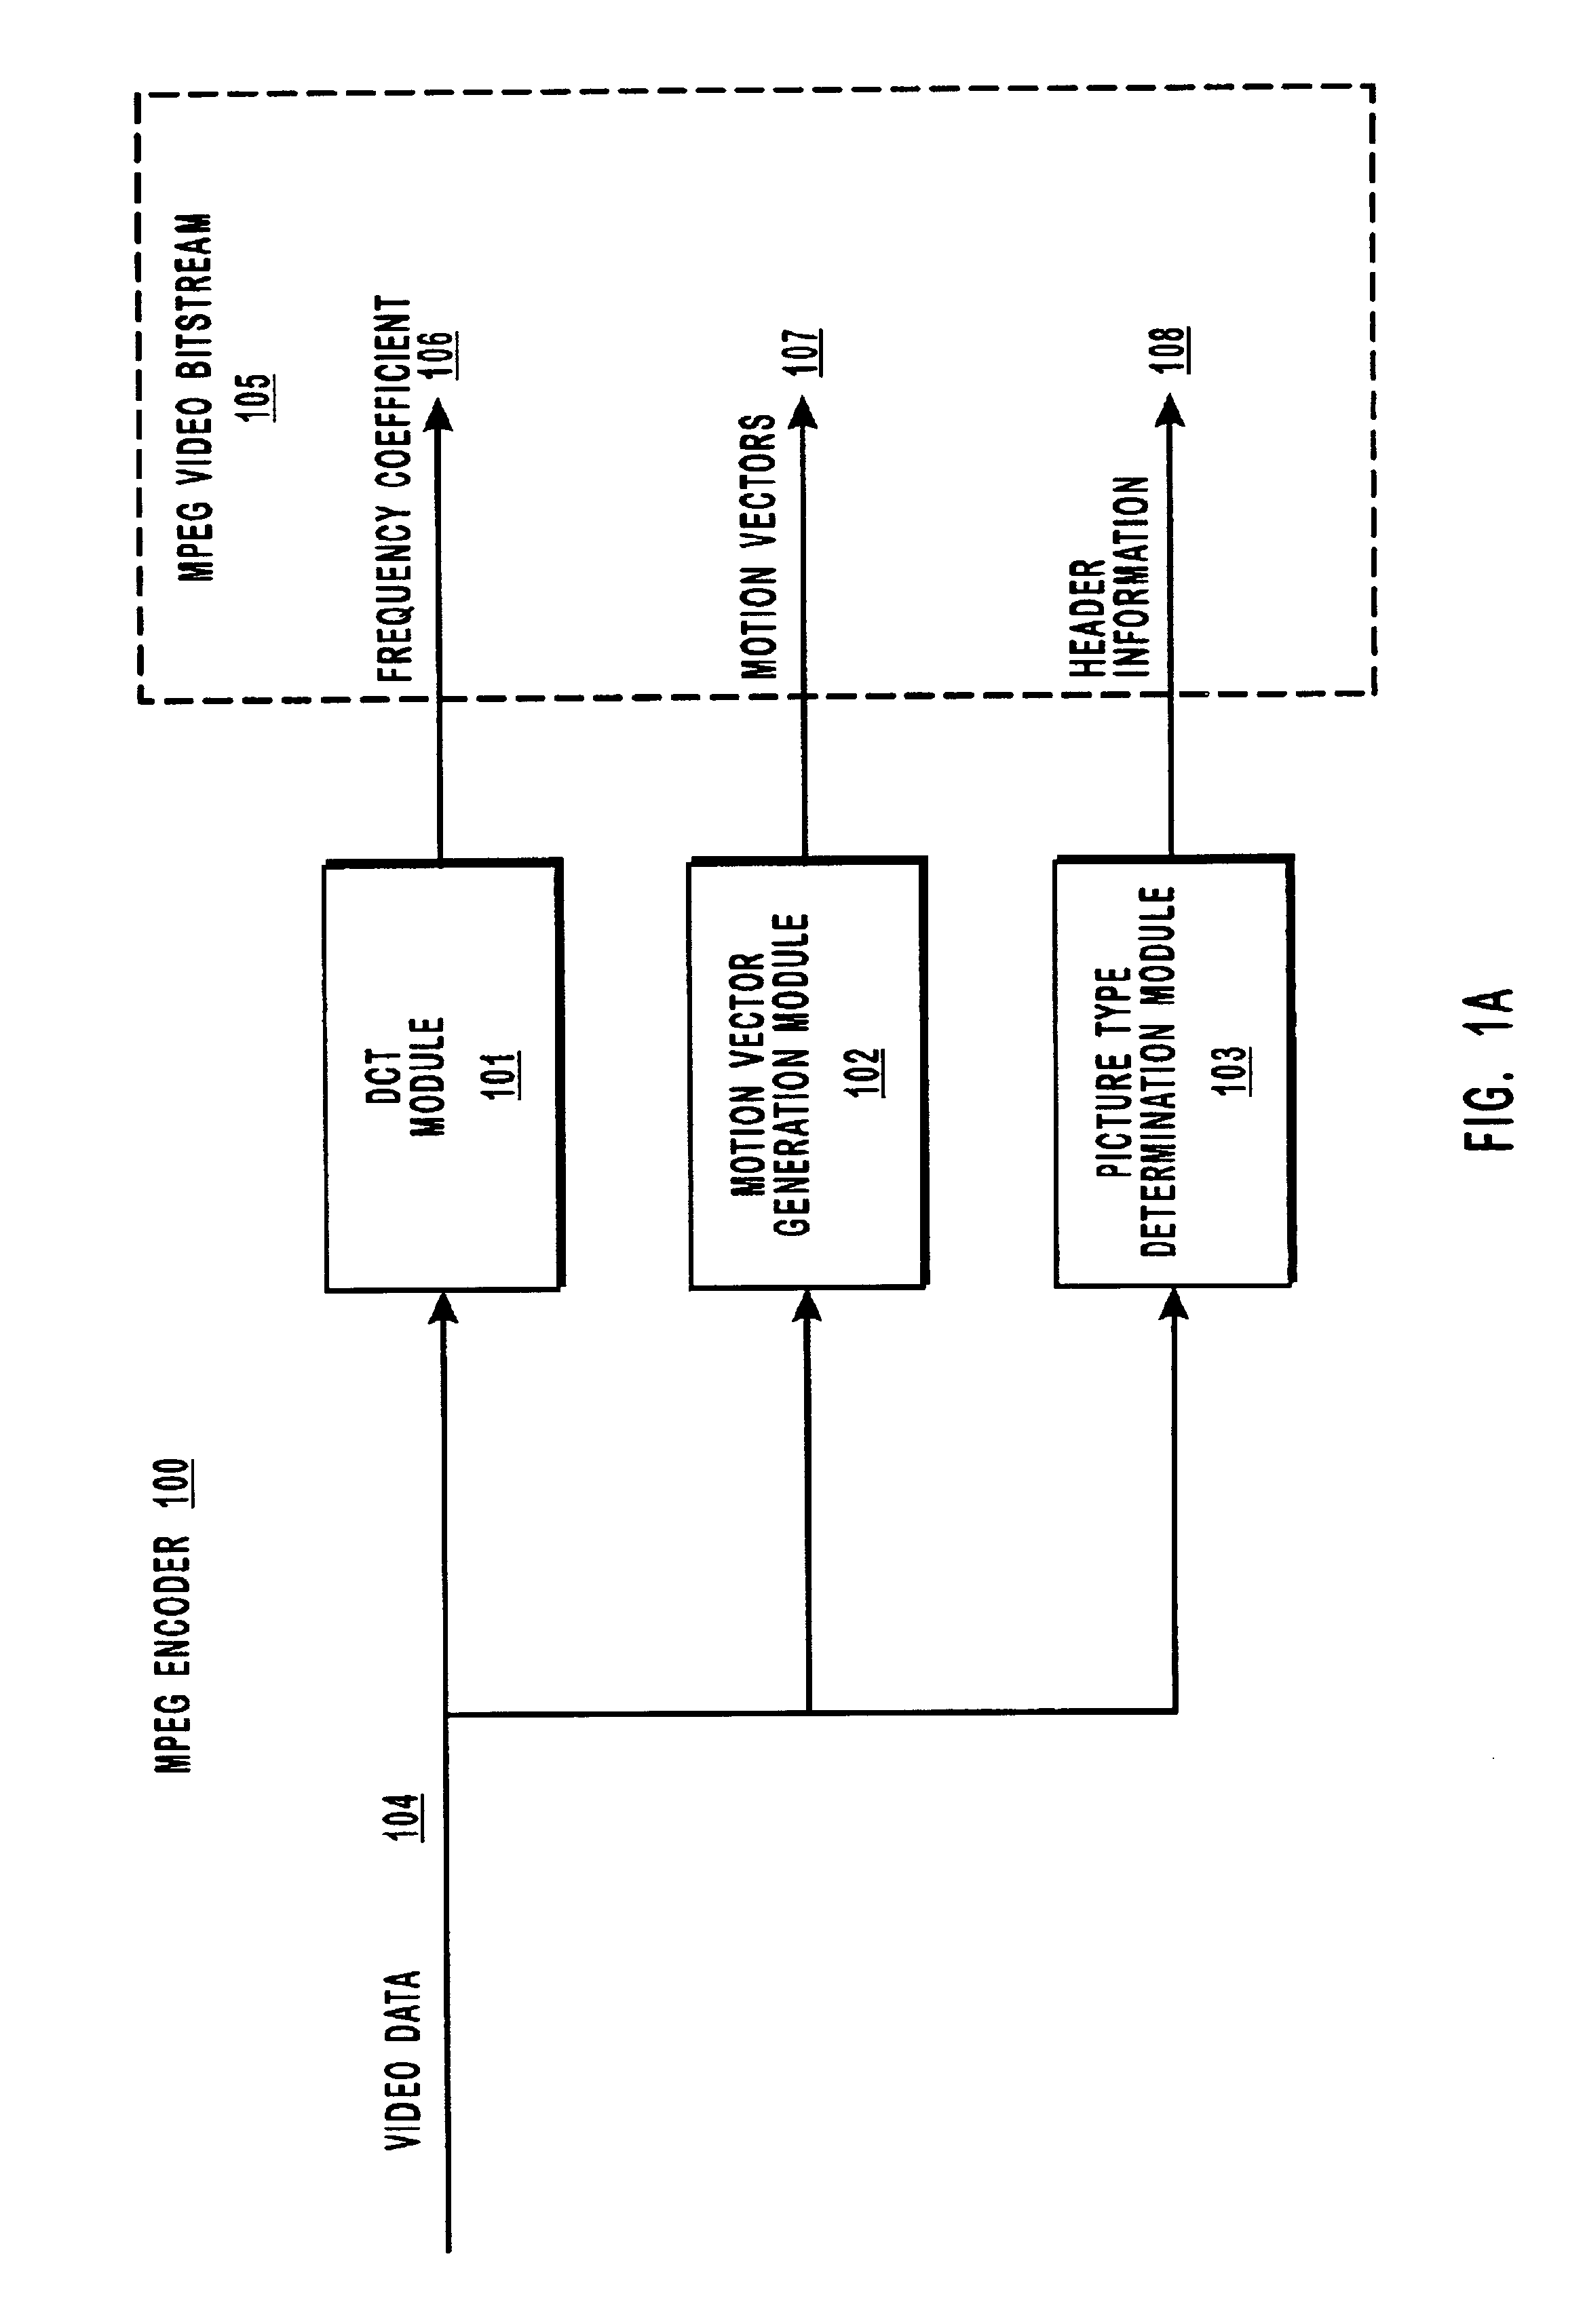 Systems and methods for MPEG subsample decoding